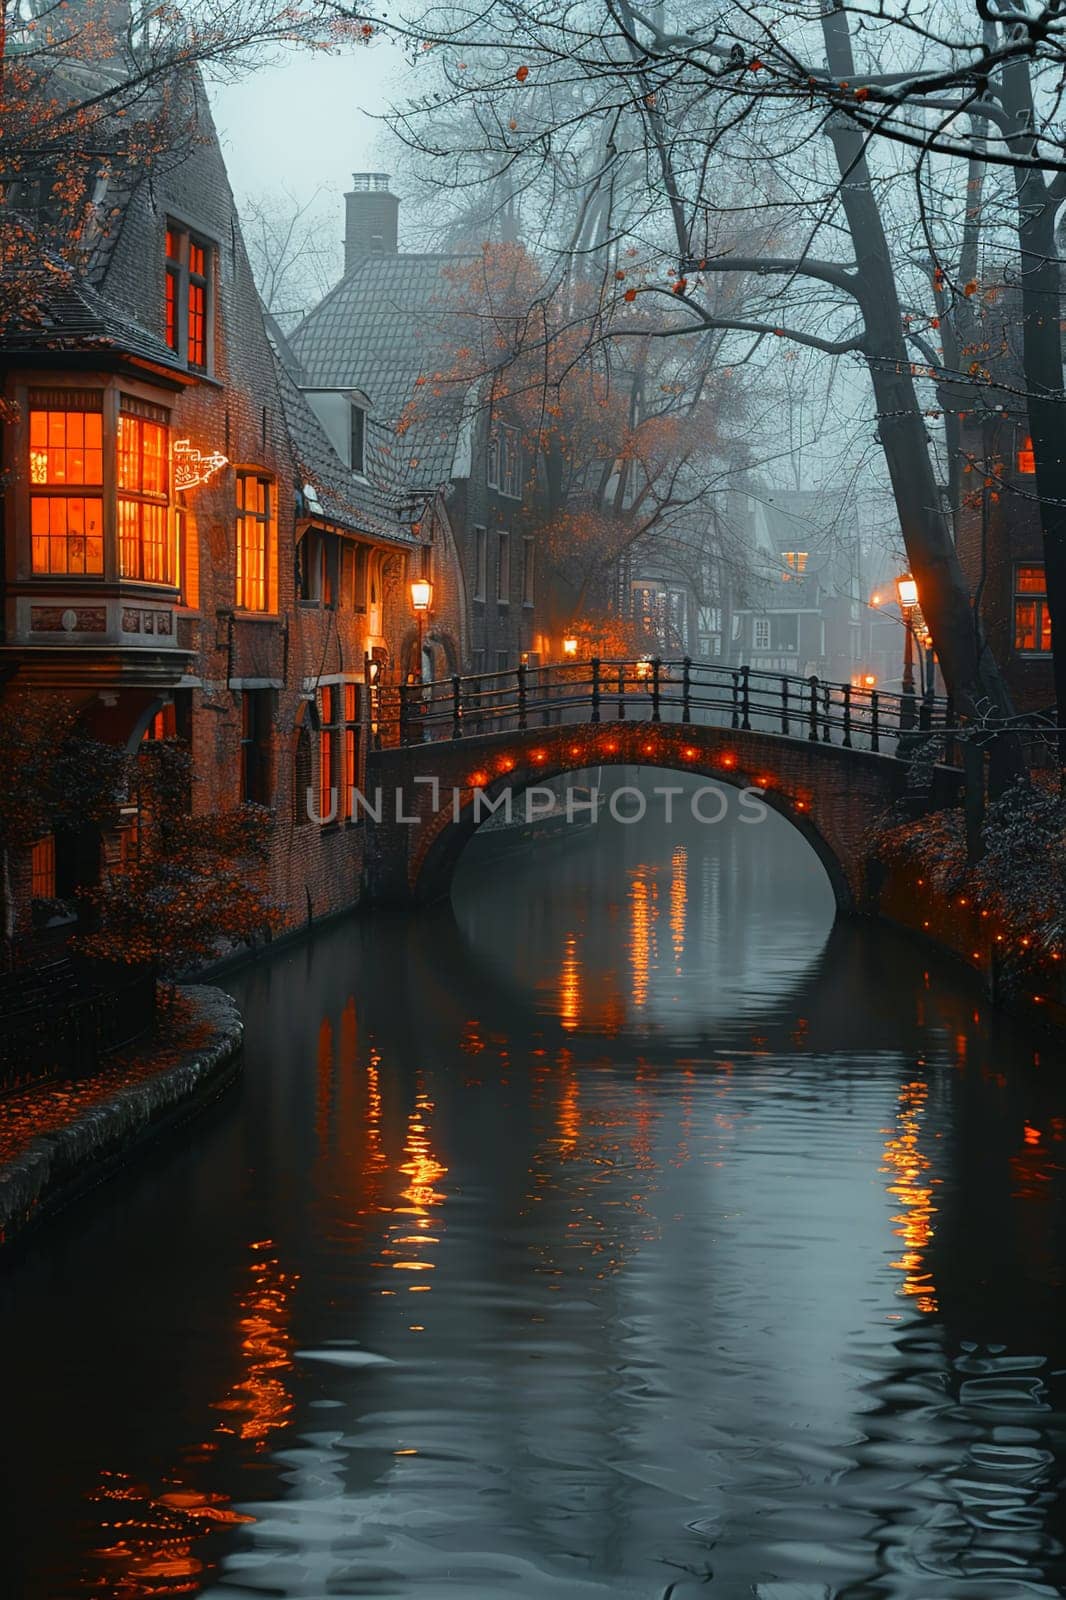 Softly Illuminated Cobblestone Bridge Over a Quiet Canal, The lights blur into the water, a tranquil passage through time.